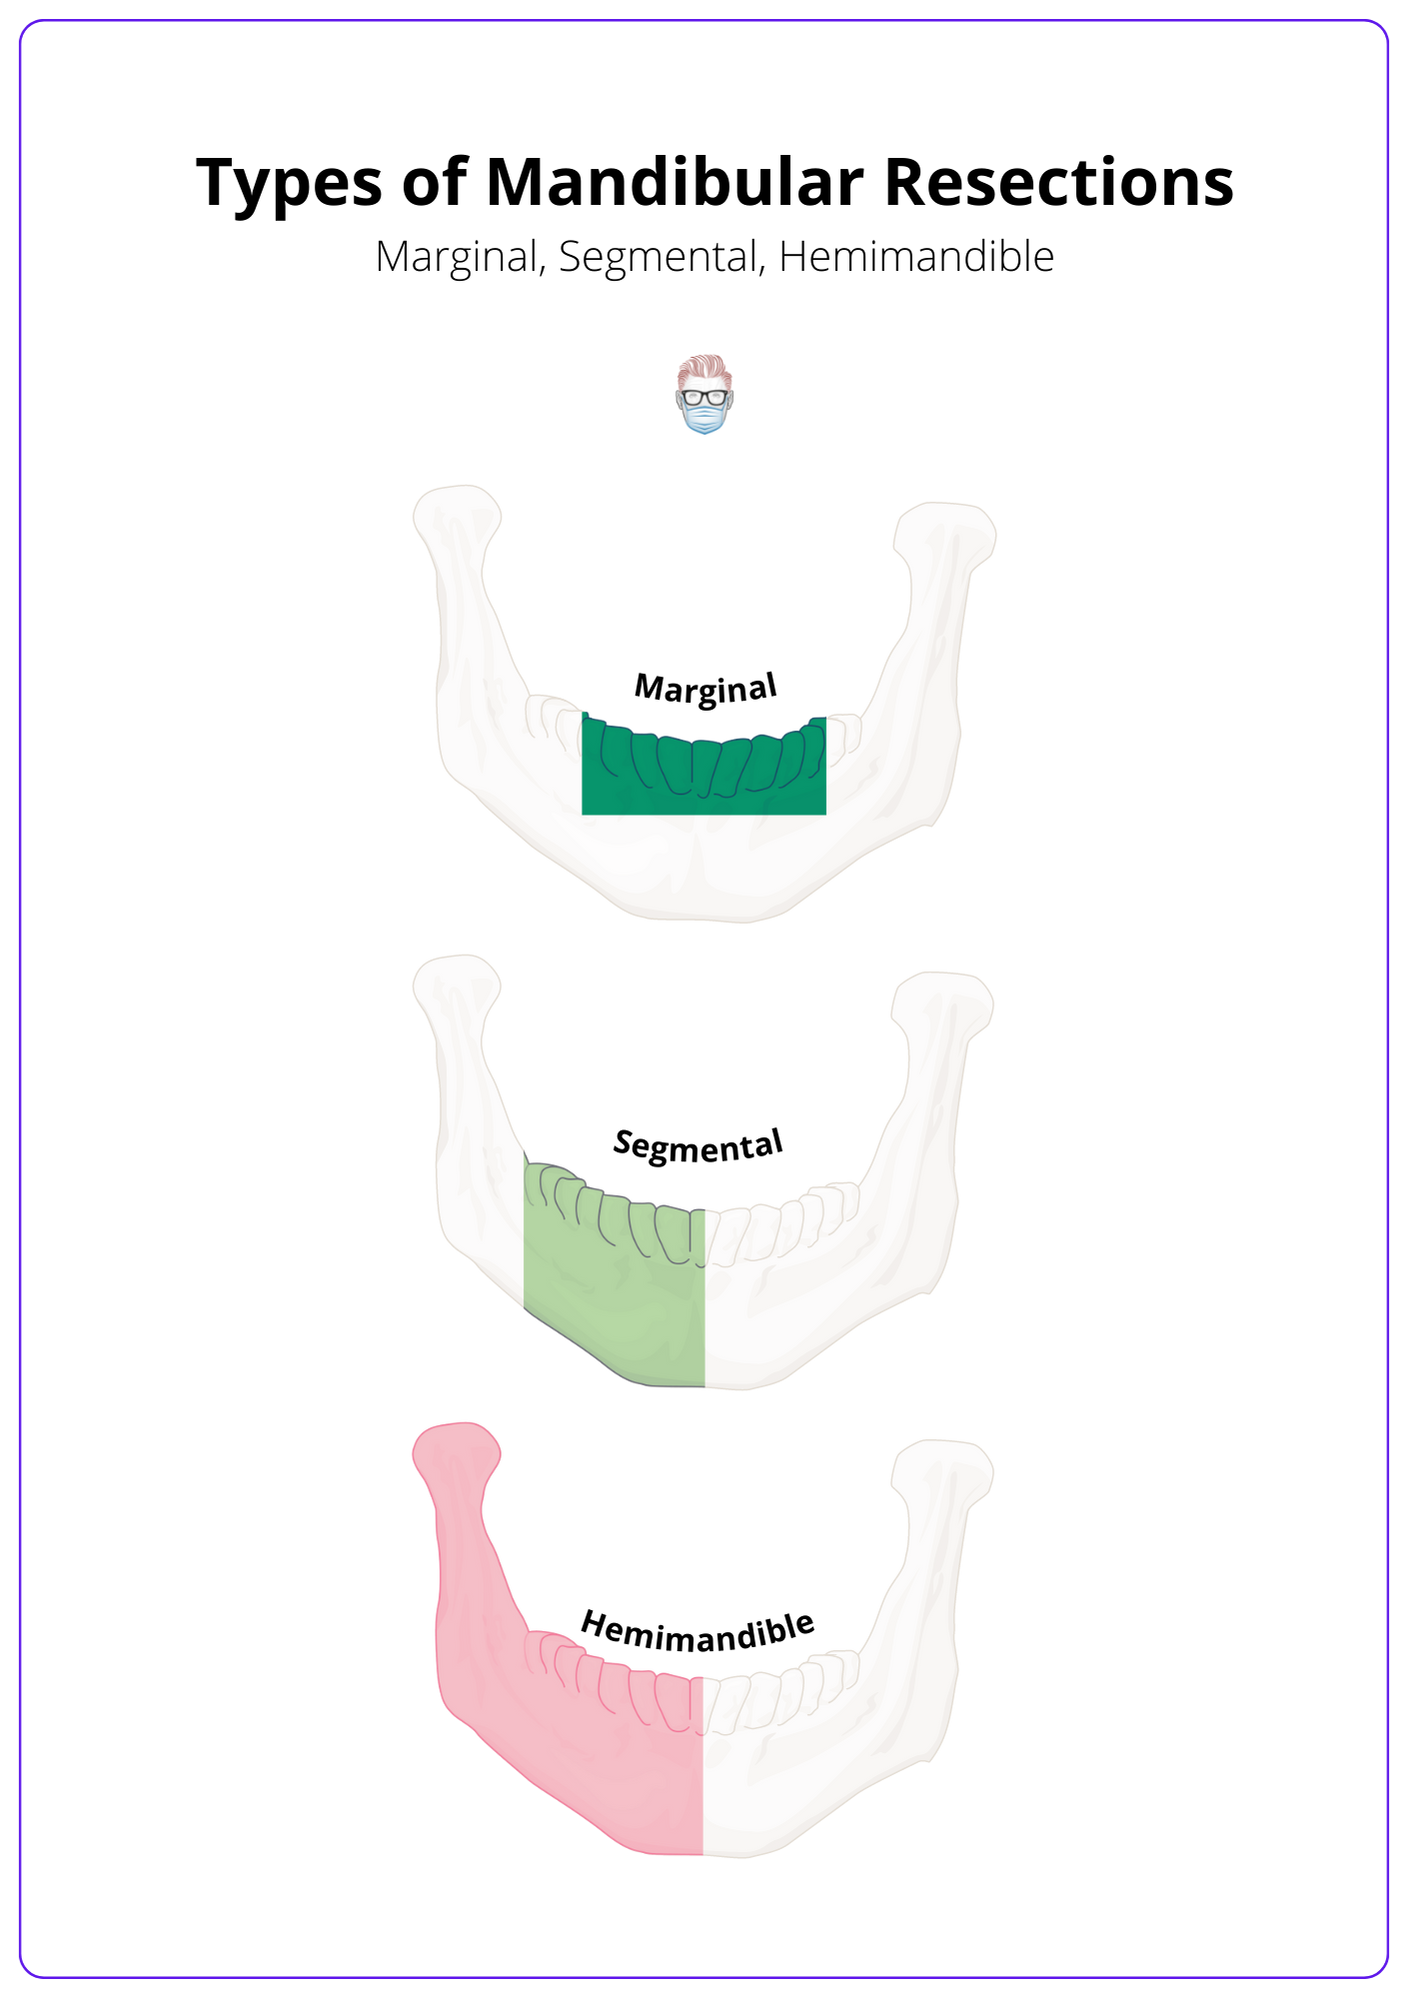 Mandibular resections can be classified into 3 different types of mandibulectomies based on their width and length of resection: marginal (rim), segmental and hemimandile